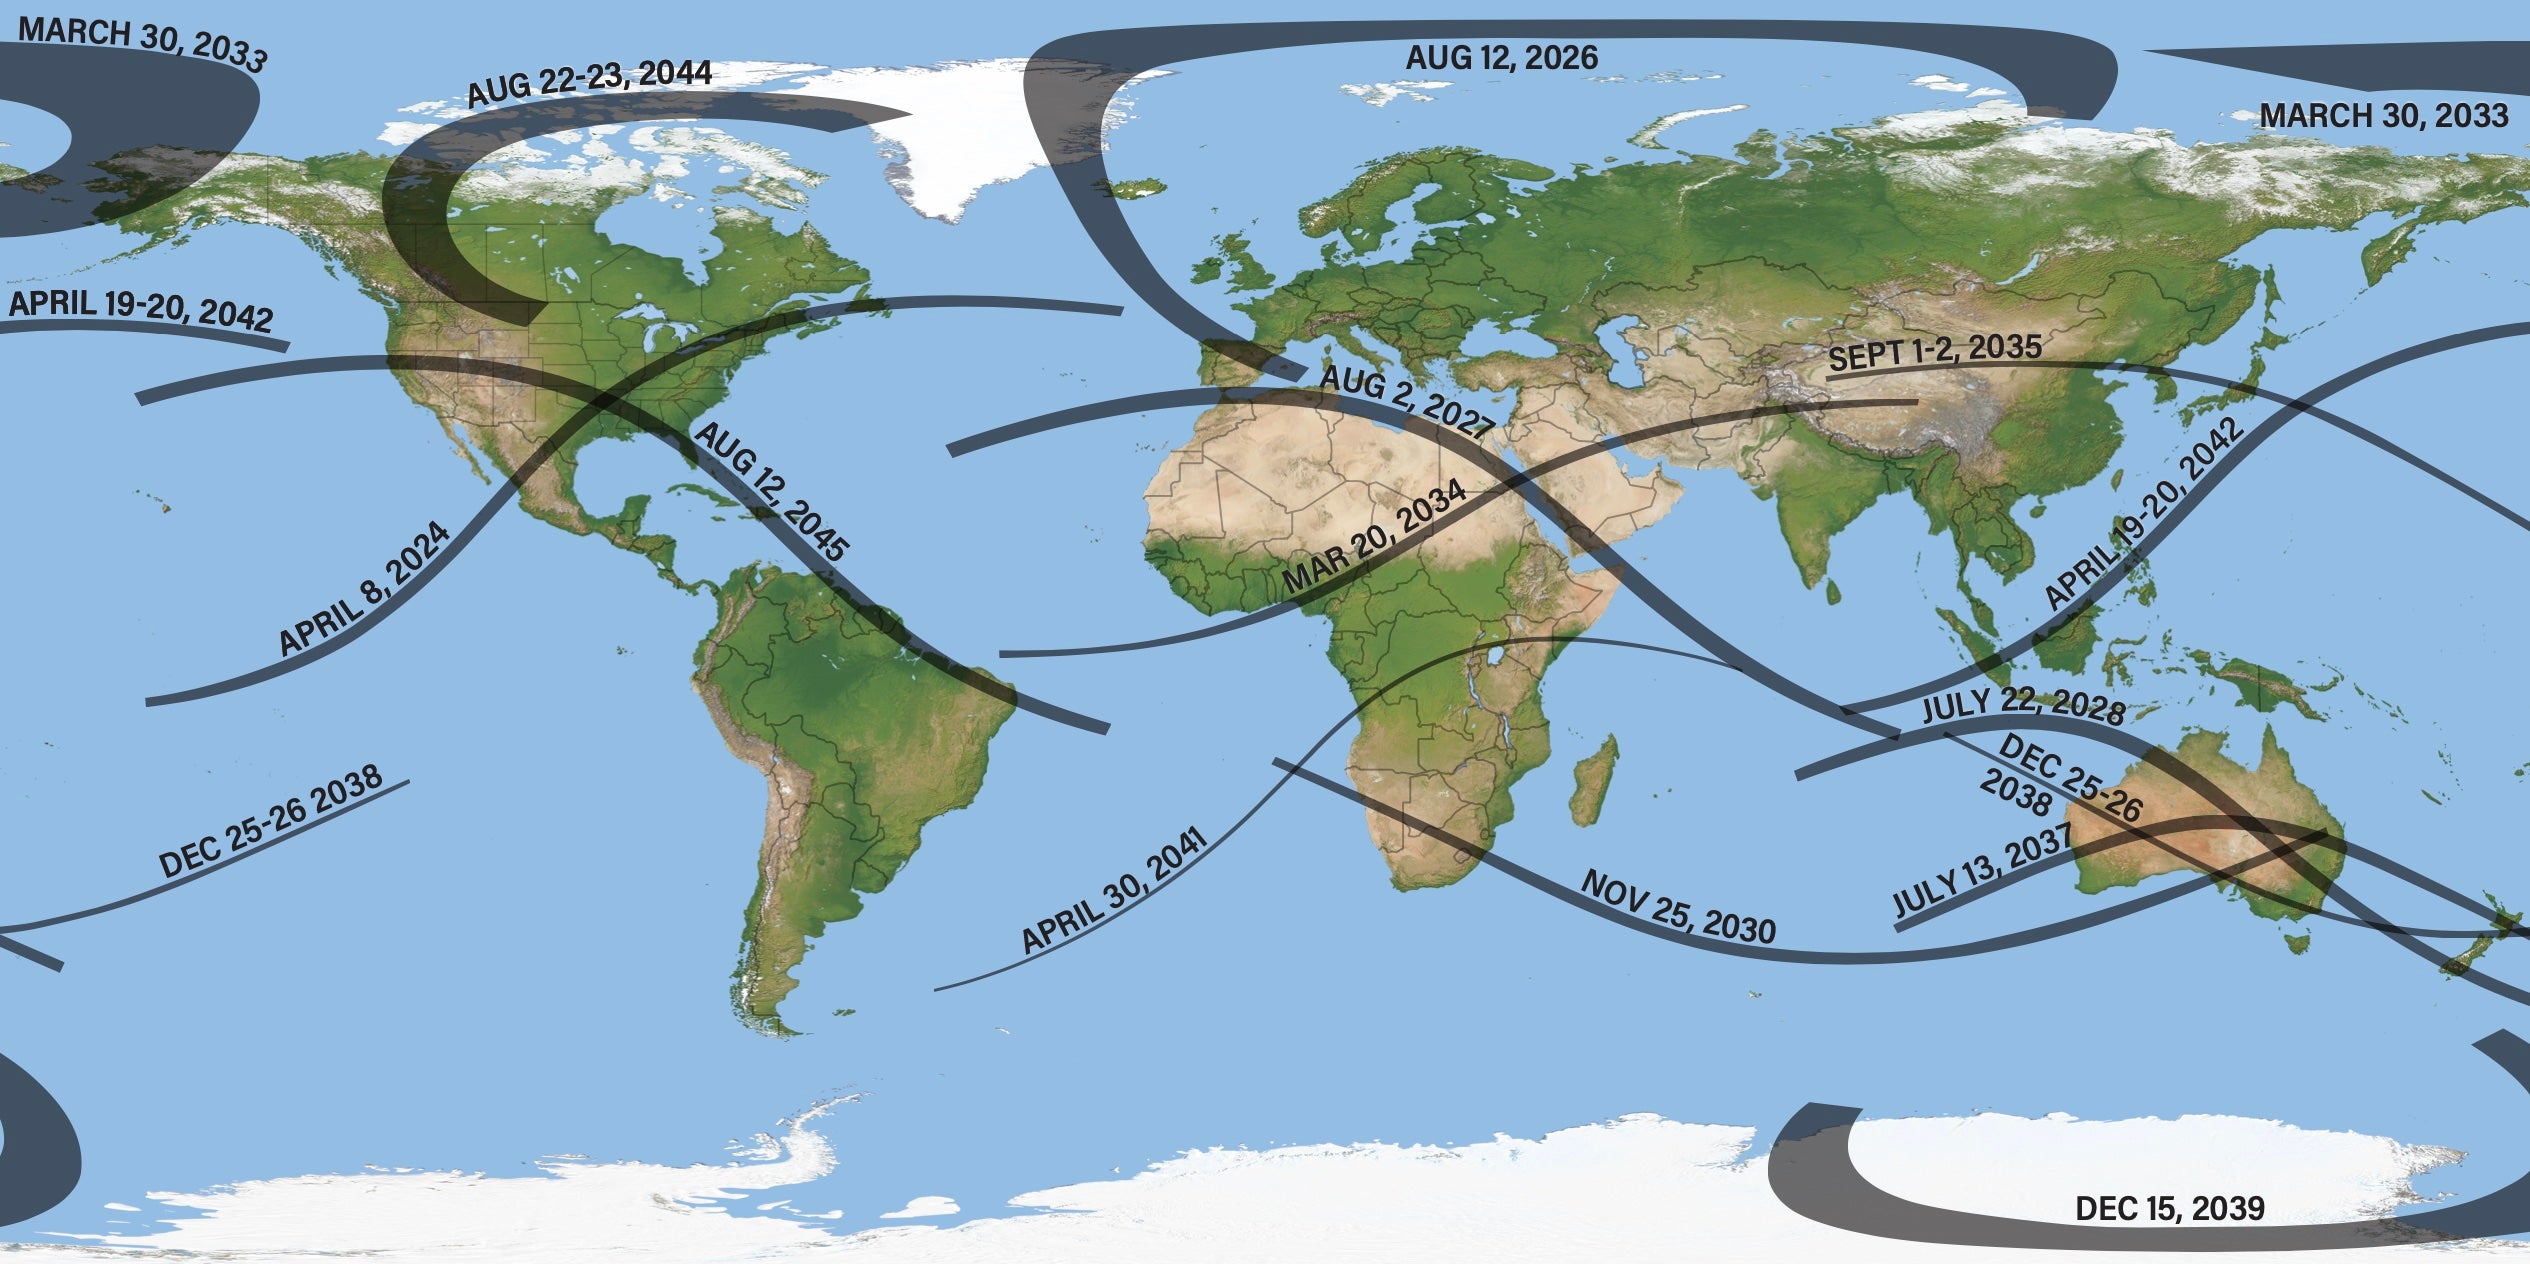 This map shows the locations of each eclipse from this year until the next major U.S. eclipse on Aug. 12, 2045. 